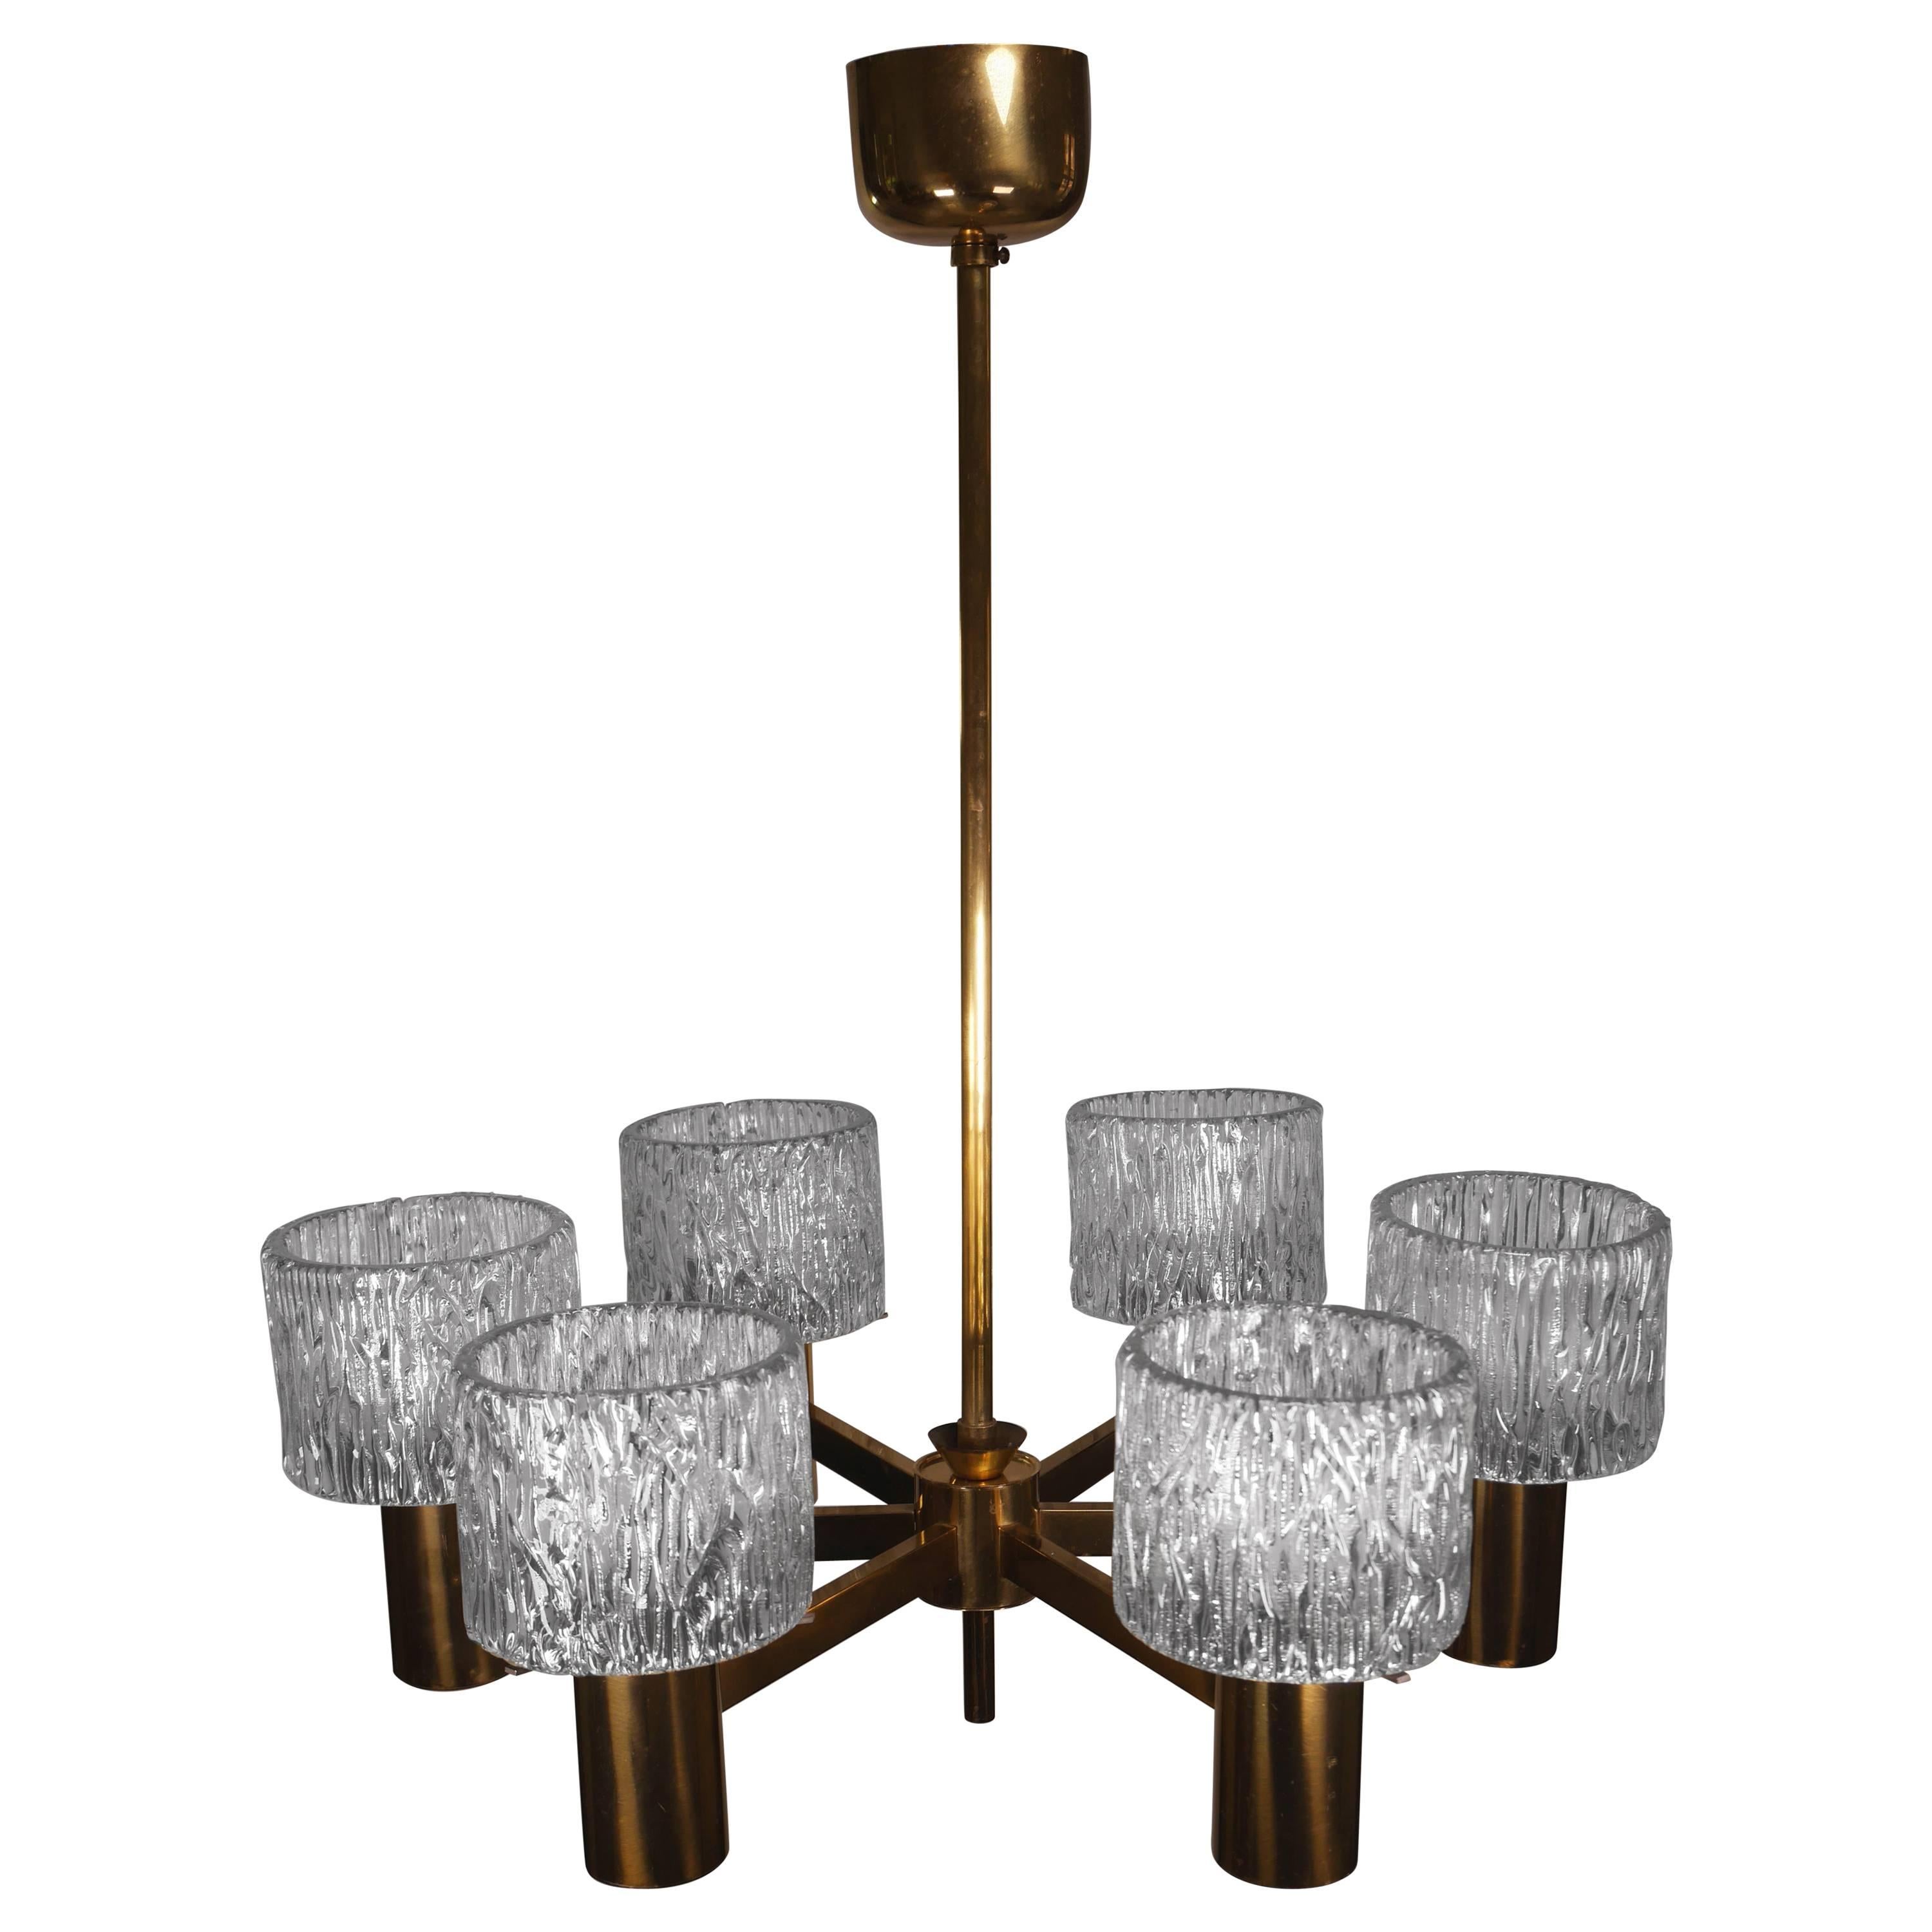 Six-Arm 1950s Swedish Modern Chandelier by Carl Fagerlund for Orrefors